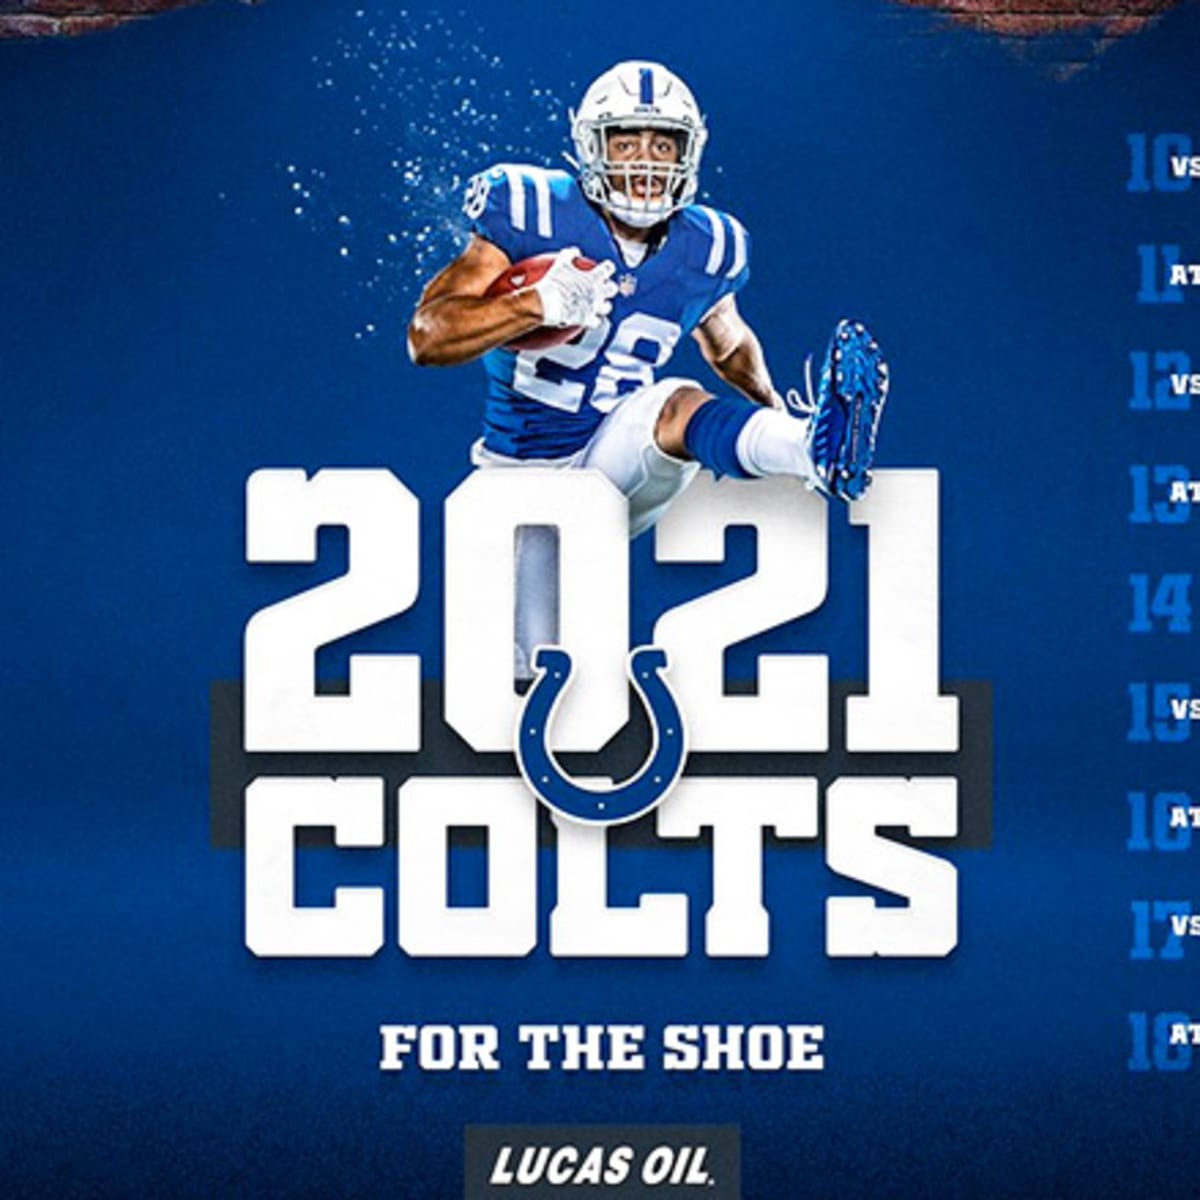 Indy Colts Schedule 2022 Indianapolis Colts Schedule 2021 - Athlonsports.com | Expert Predictions,  Picks, And Previews